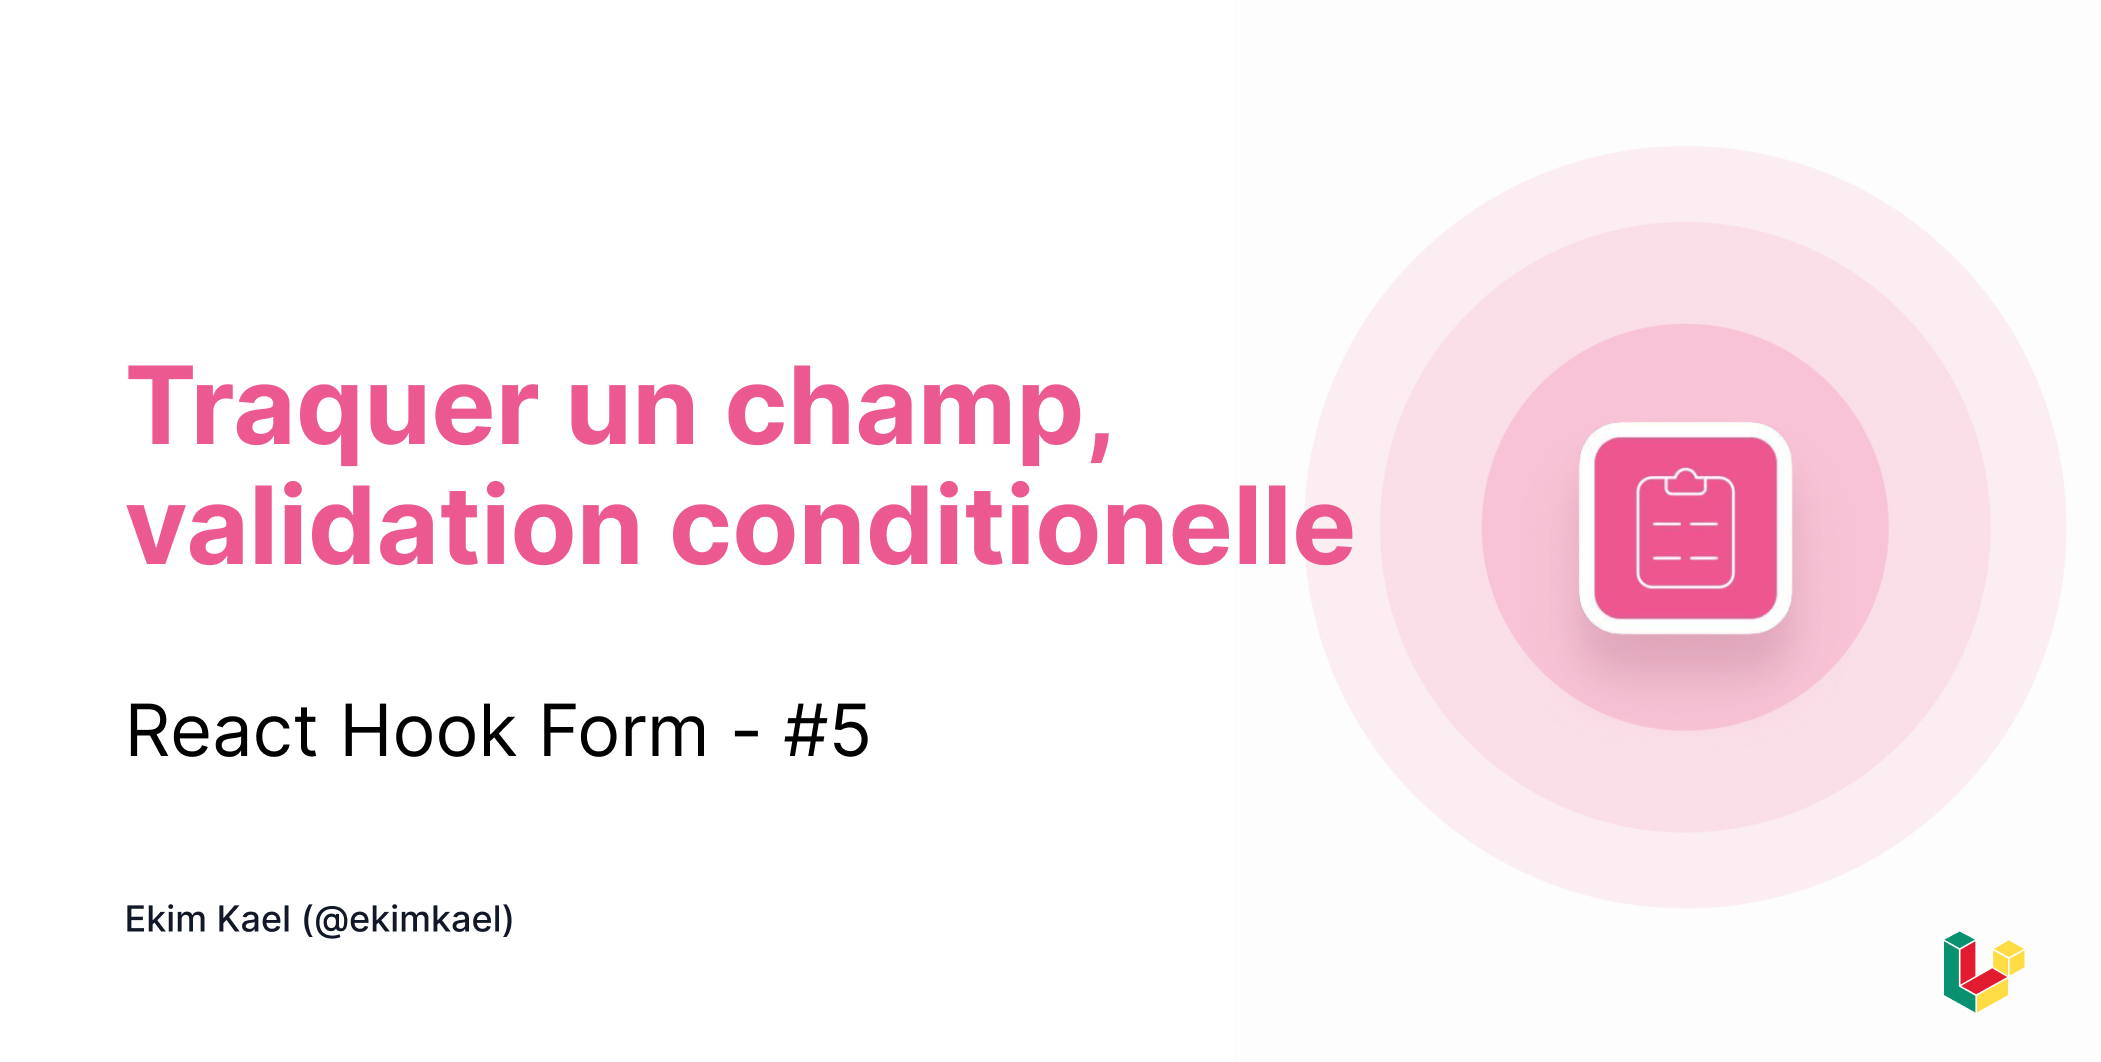 traquer-un-champ-validation-conditionelle-react-hook-form-5